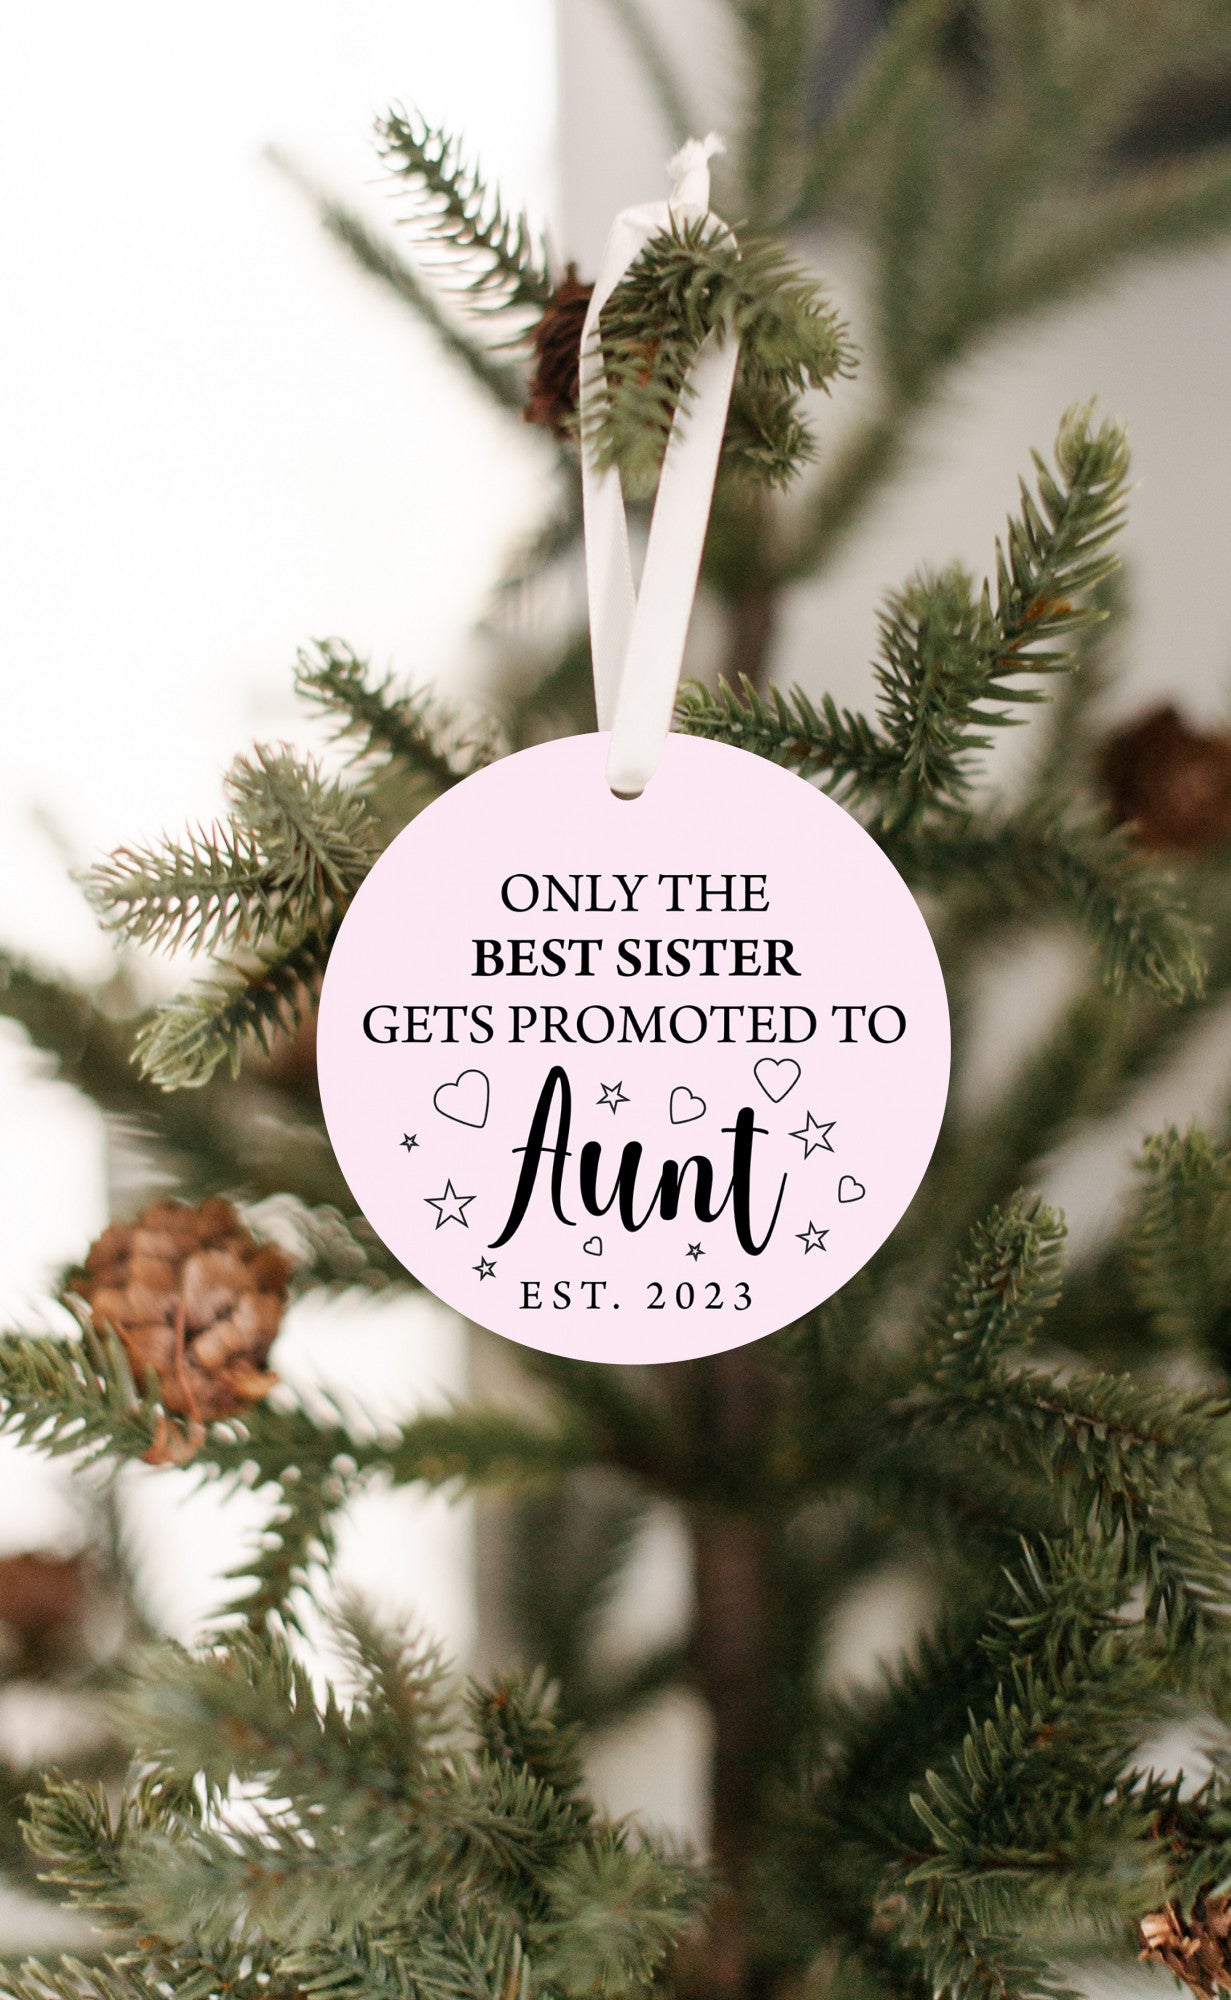 Only The Best Sister Gets Promoted to Aunt 2023 Ornament